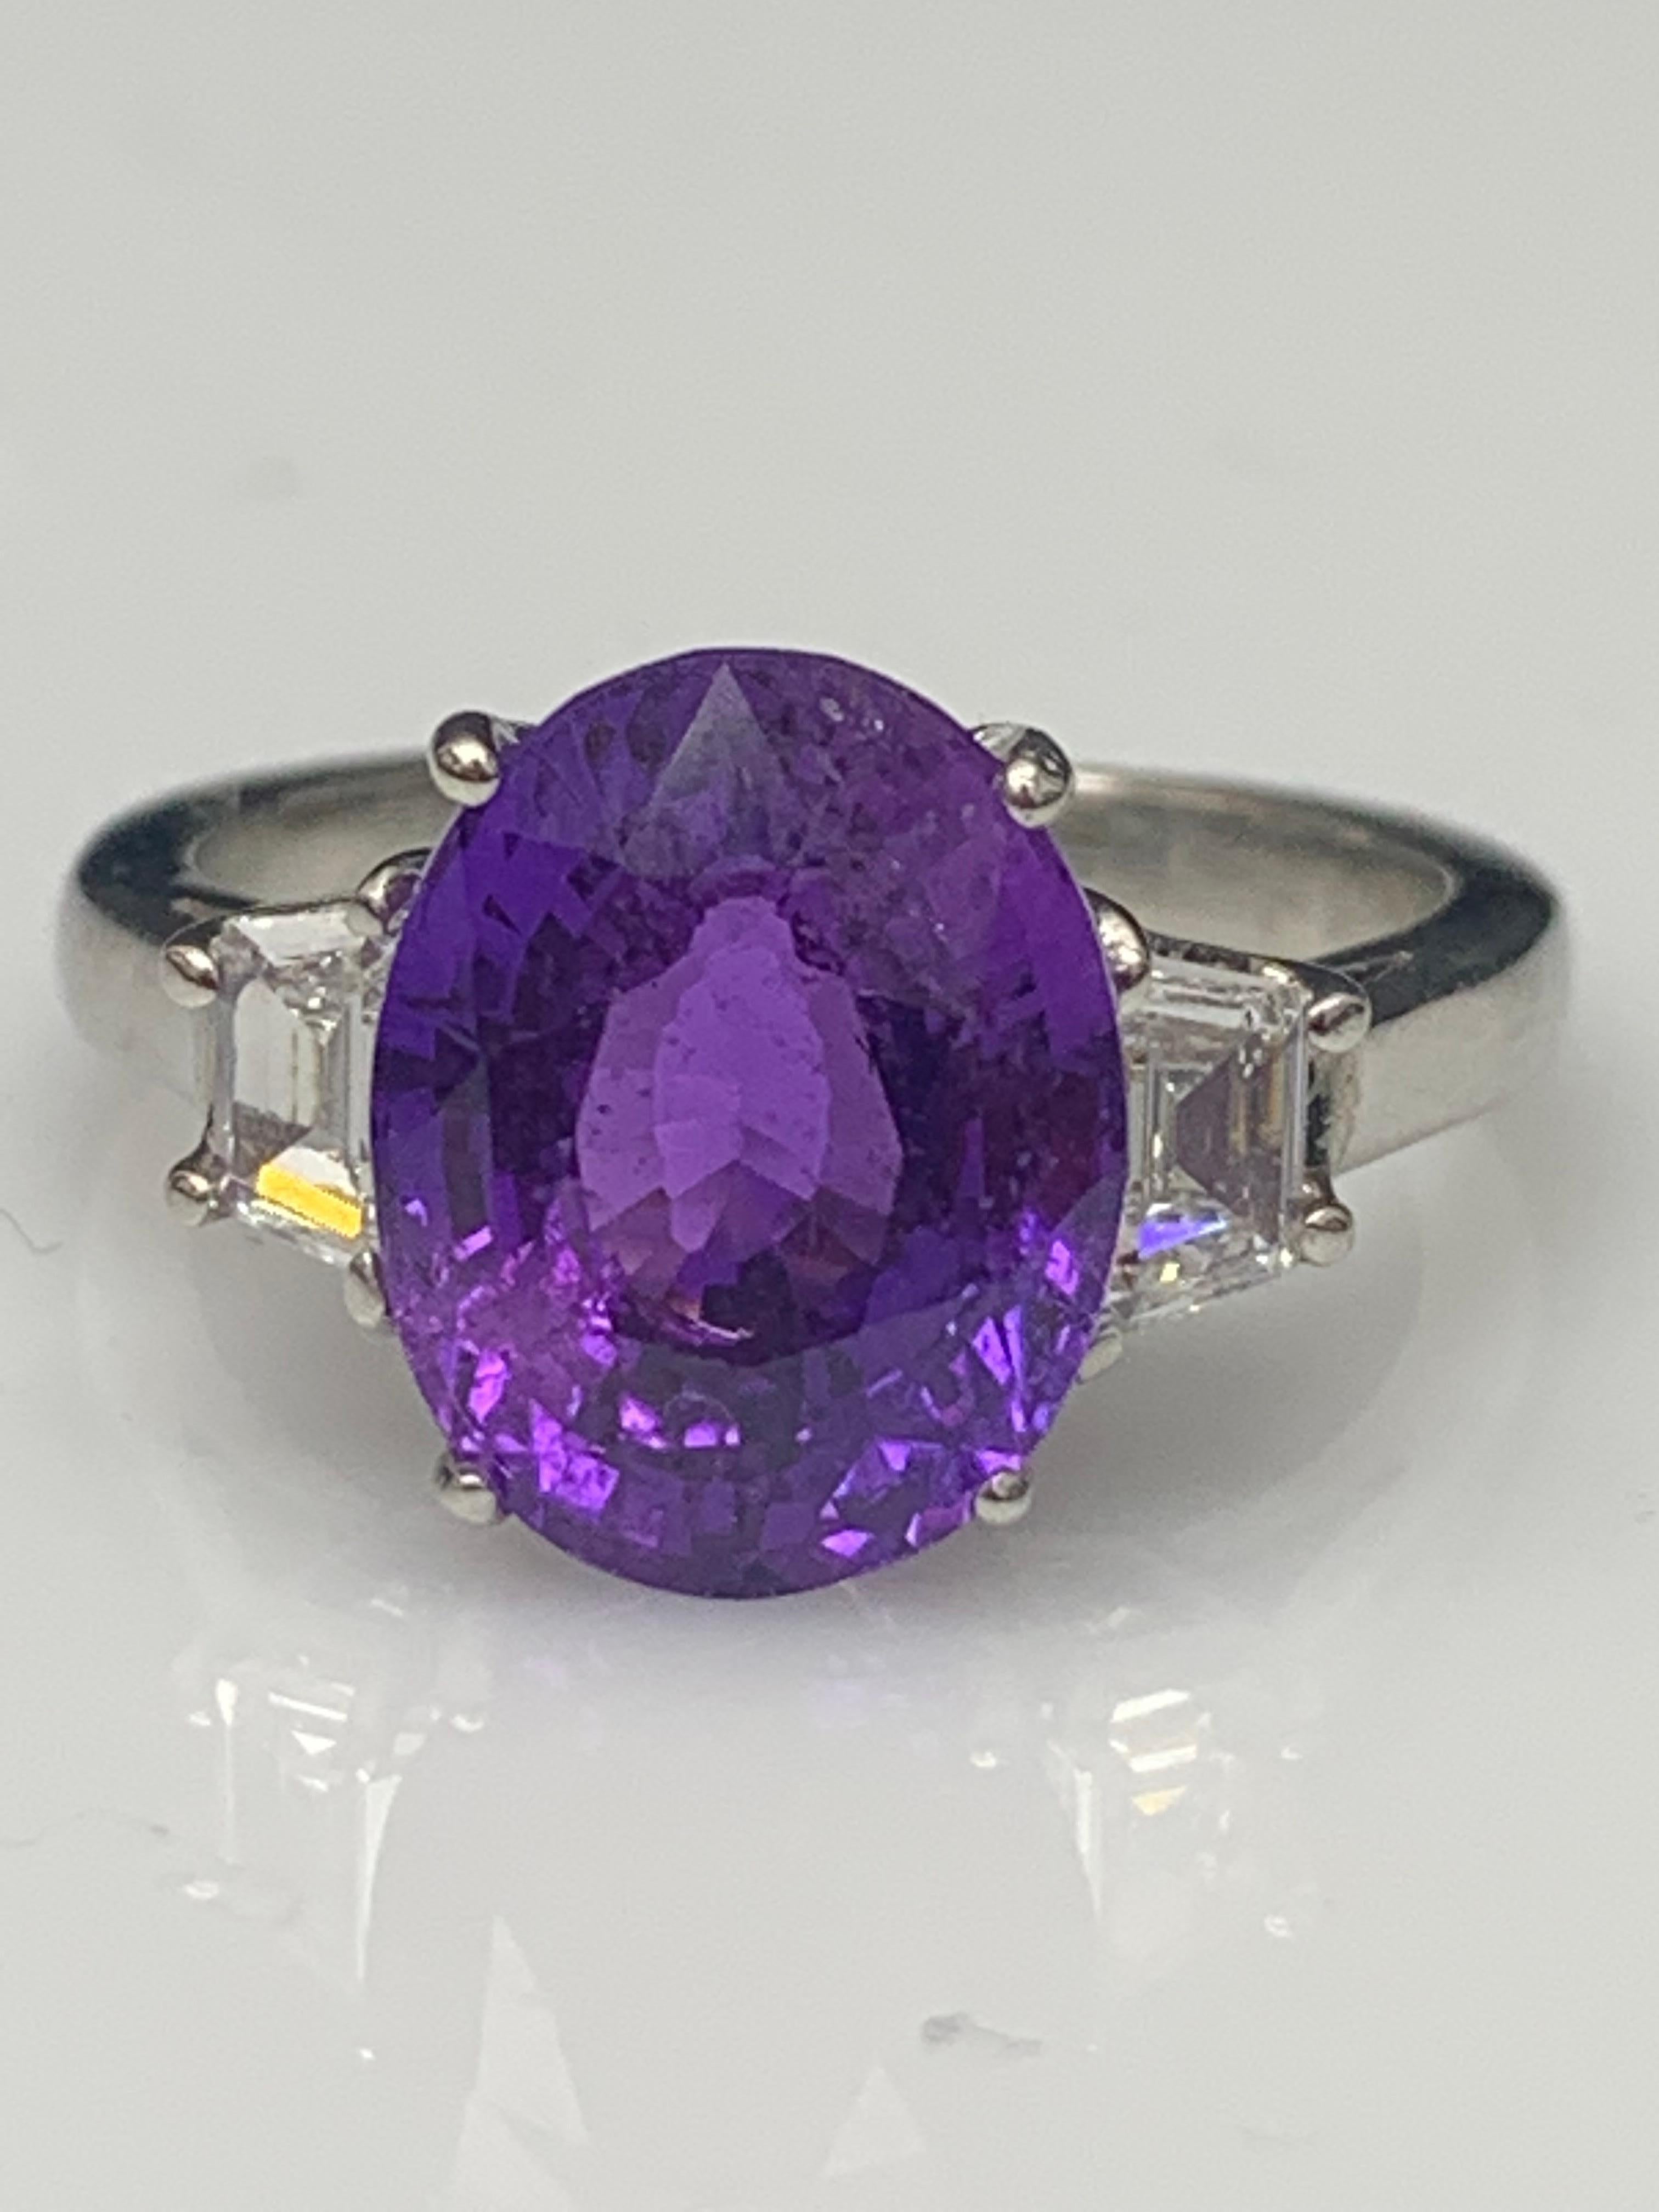 Showcases an Oval cut , Vibrant color Purple Sapphire weighing 5.56 carats, flanked by two brilliant cut trapezoid diamonds weighing 0.60 carats total. Elegantly set in a polished platinum composition.